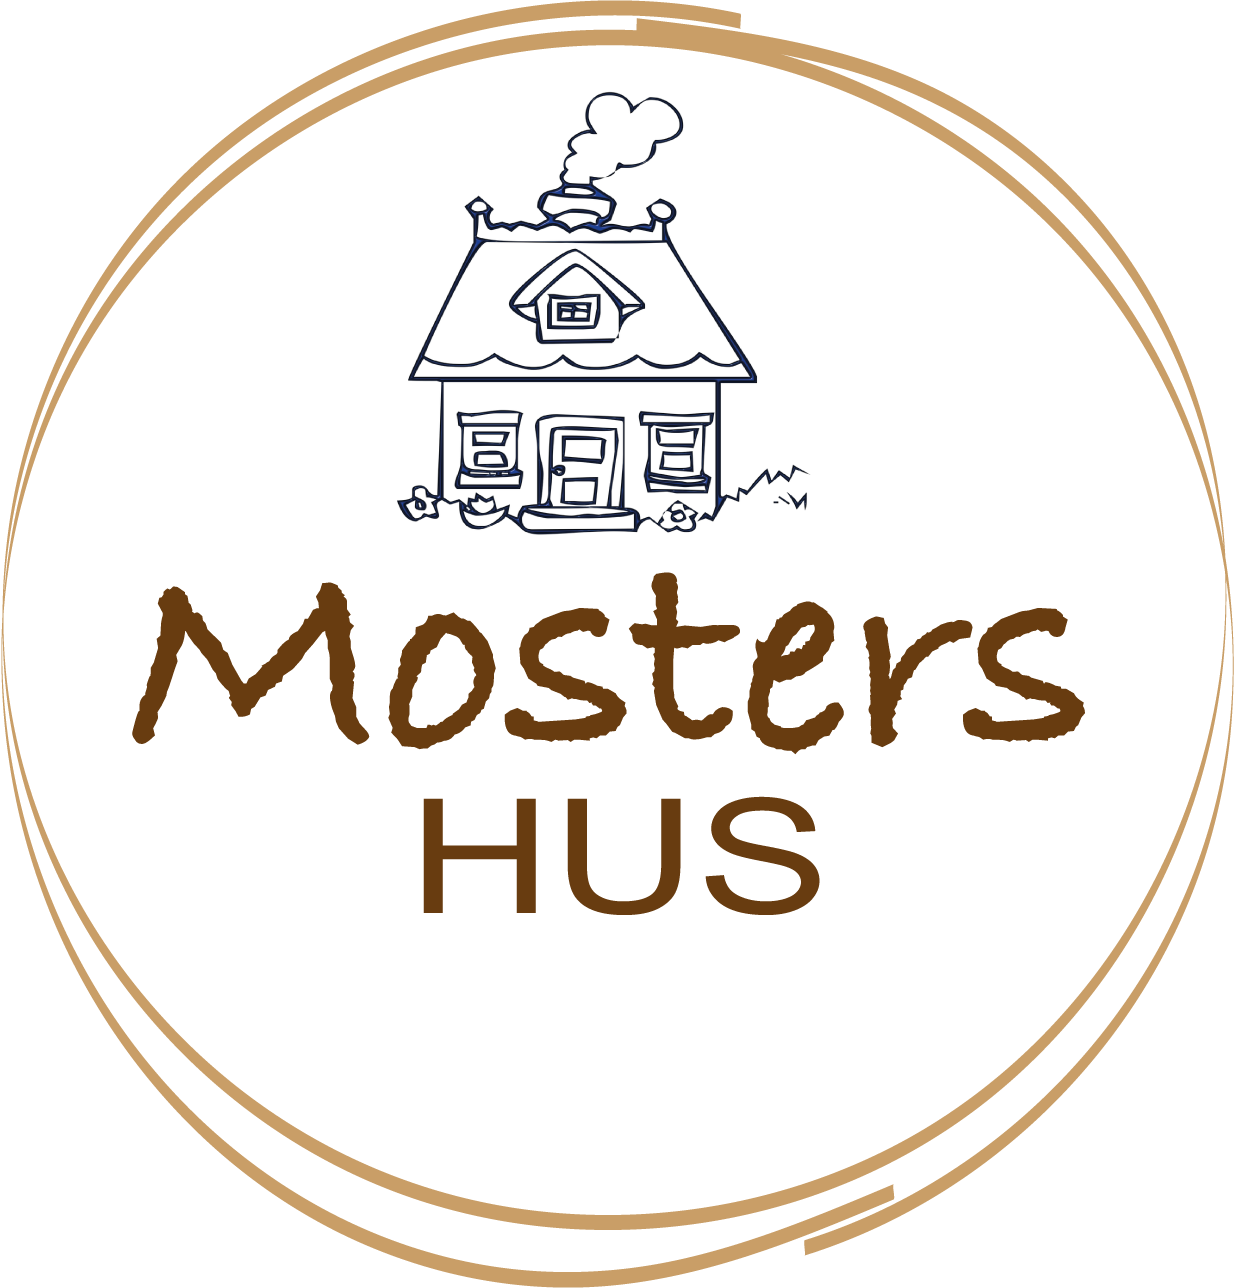 Mosters Hus logo